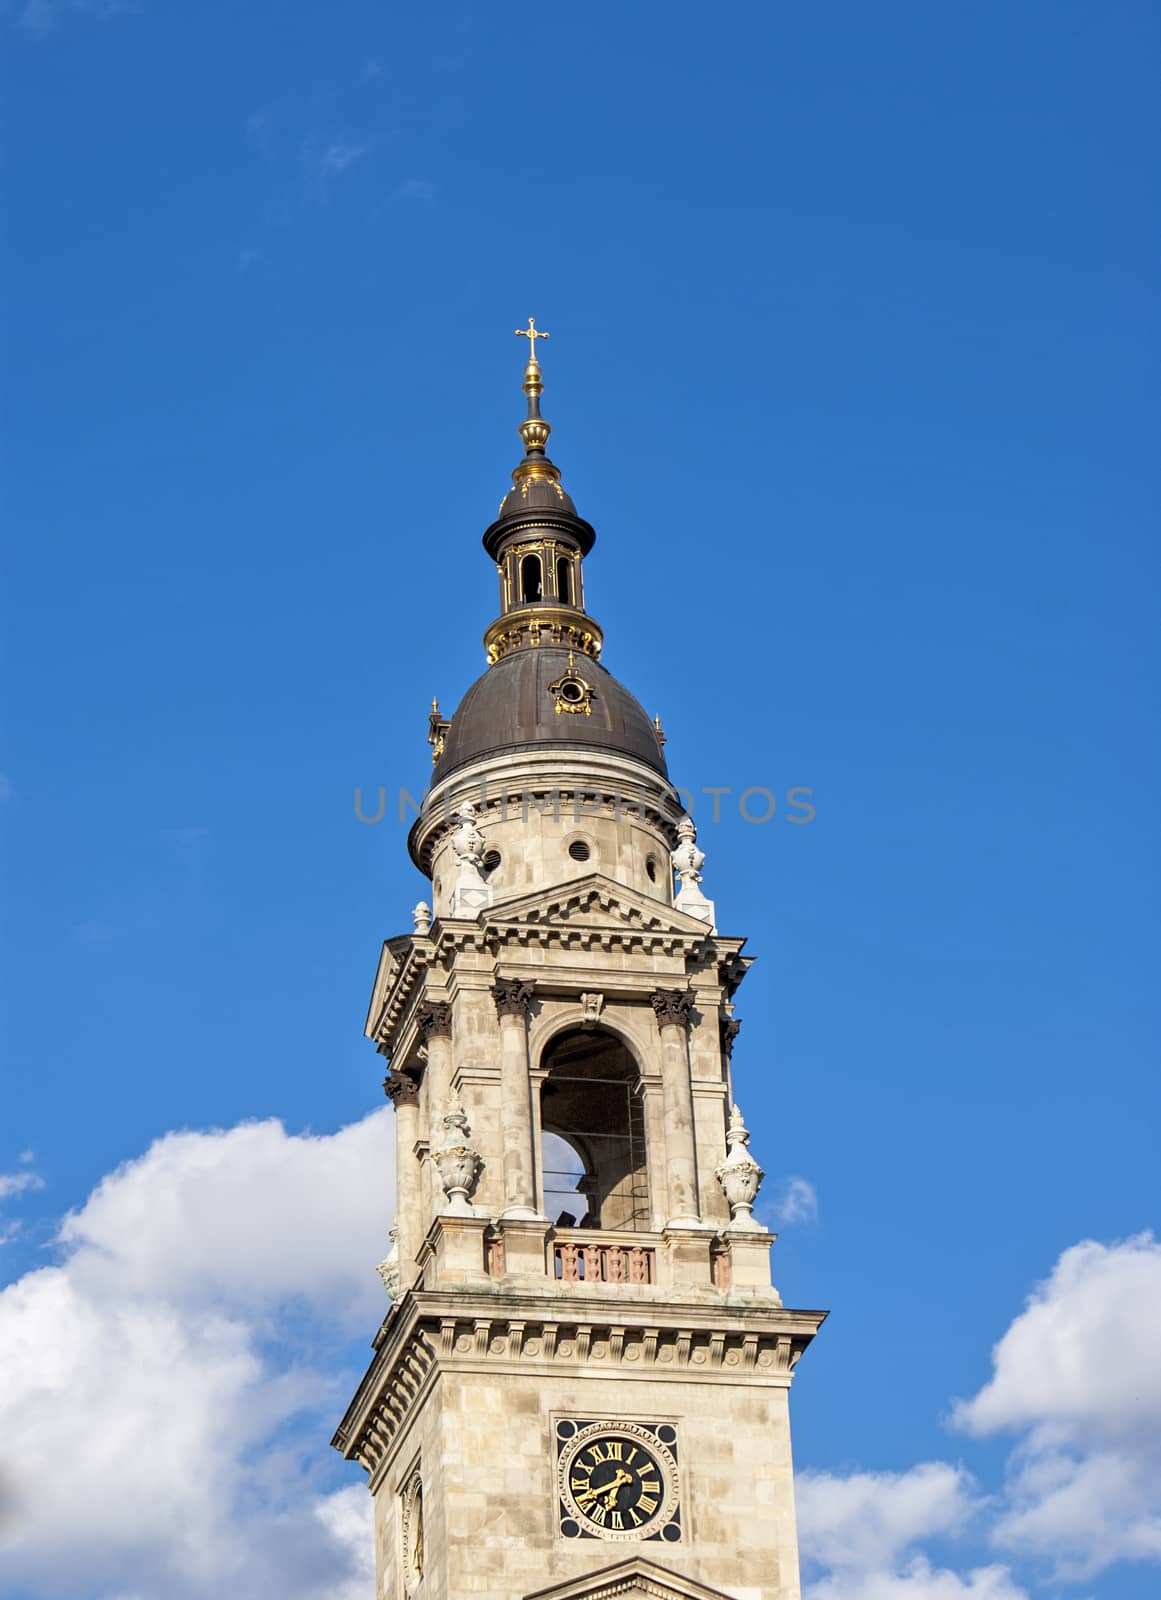 Belfry at blue sky in Budapest, Hungary by papadimitriou